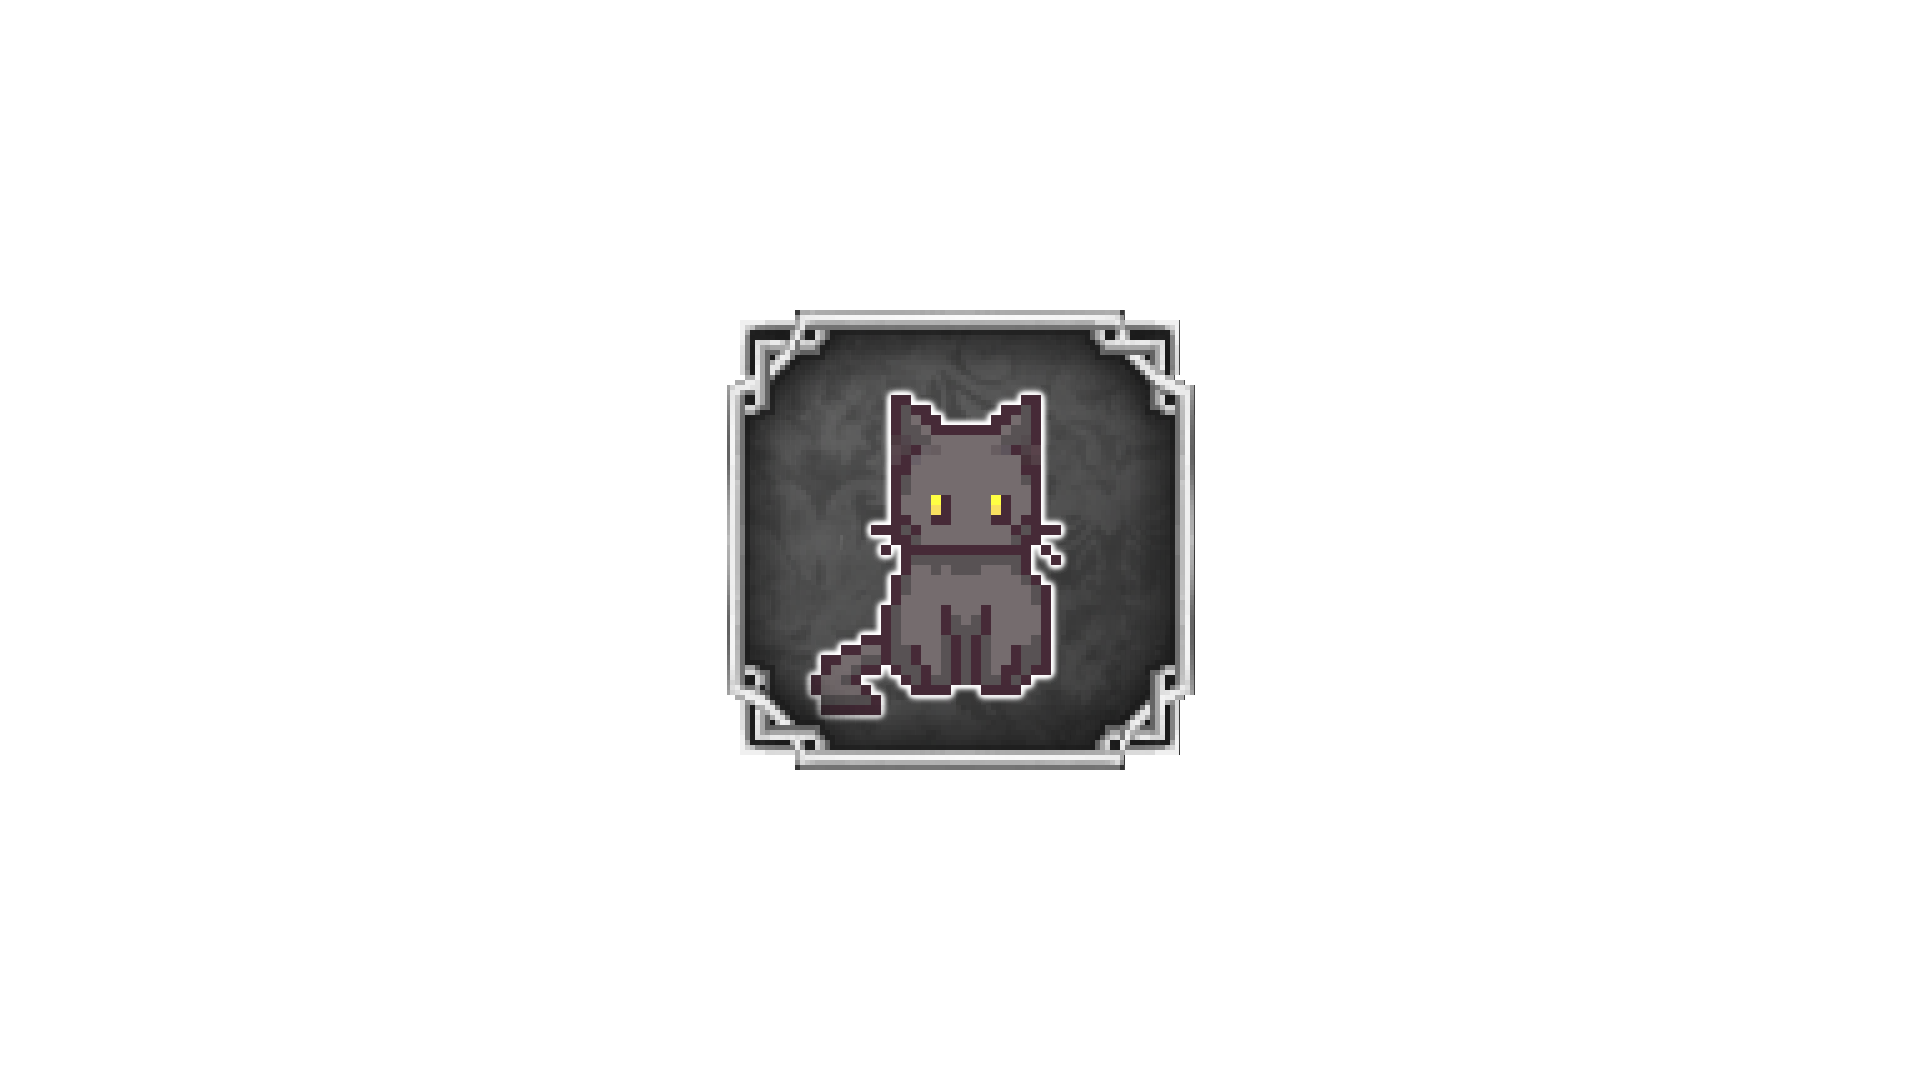 Icon for Black Cat Chat